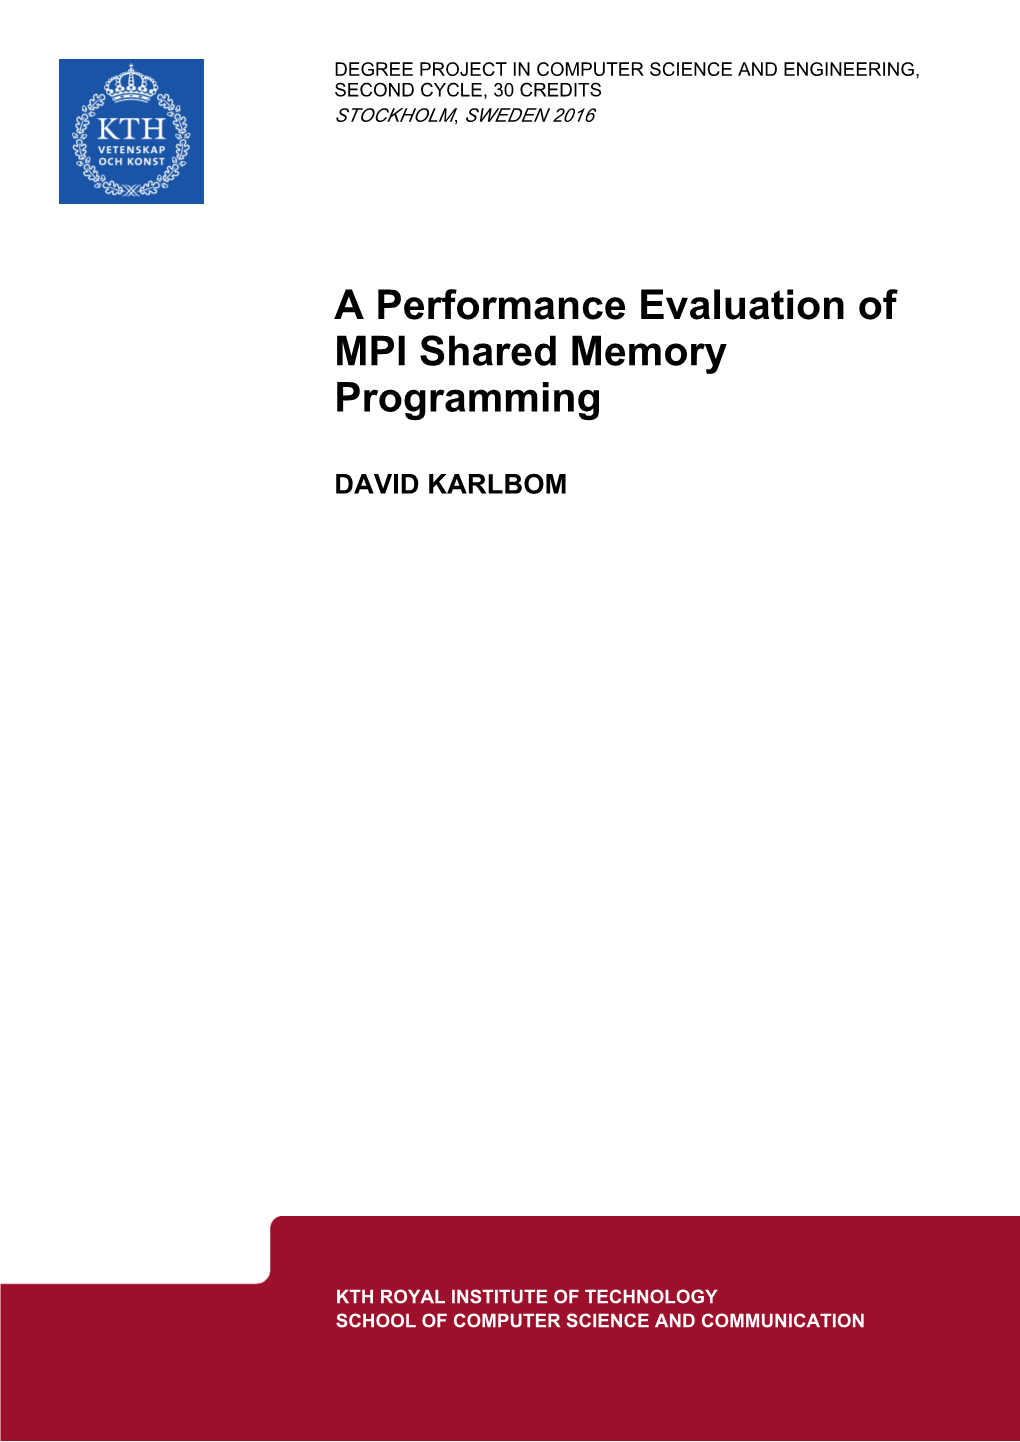 A Performance Evaluation of MPI Shared Memory Programming